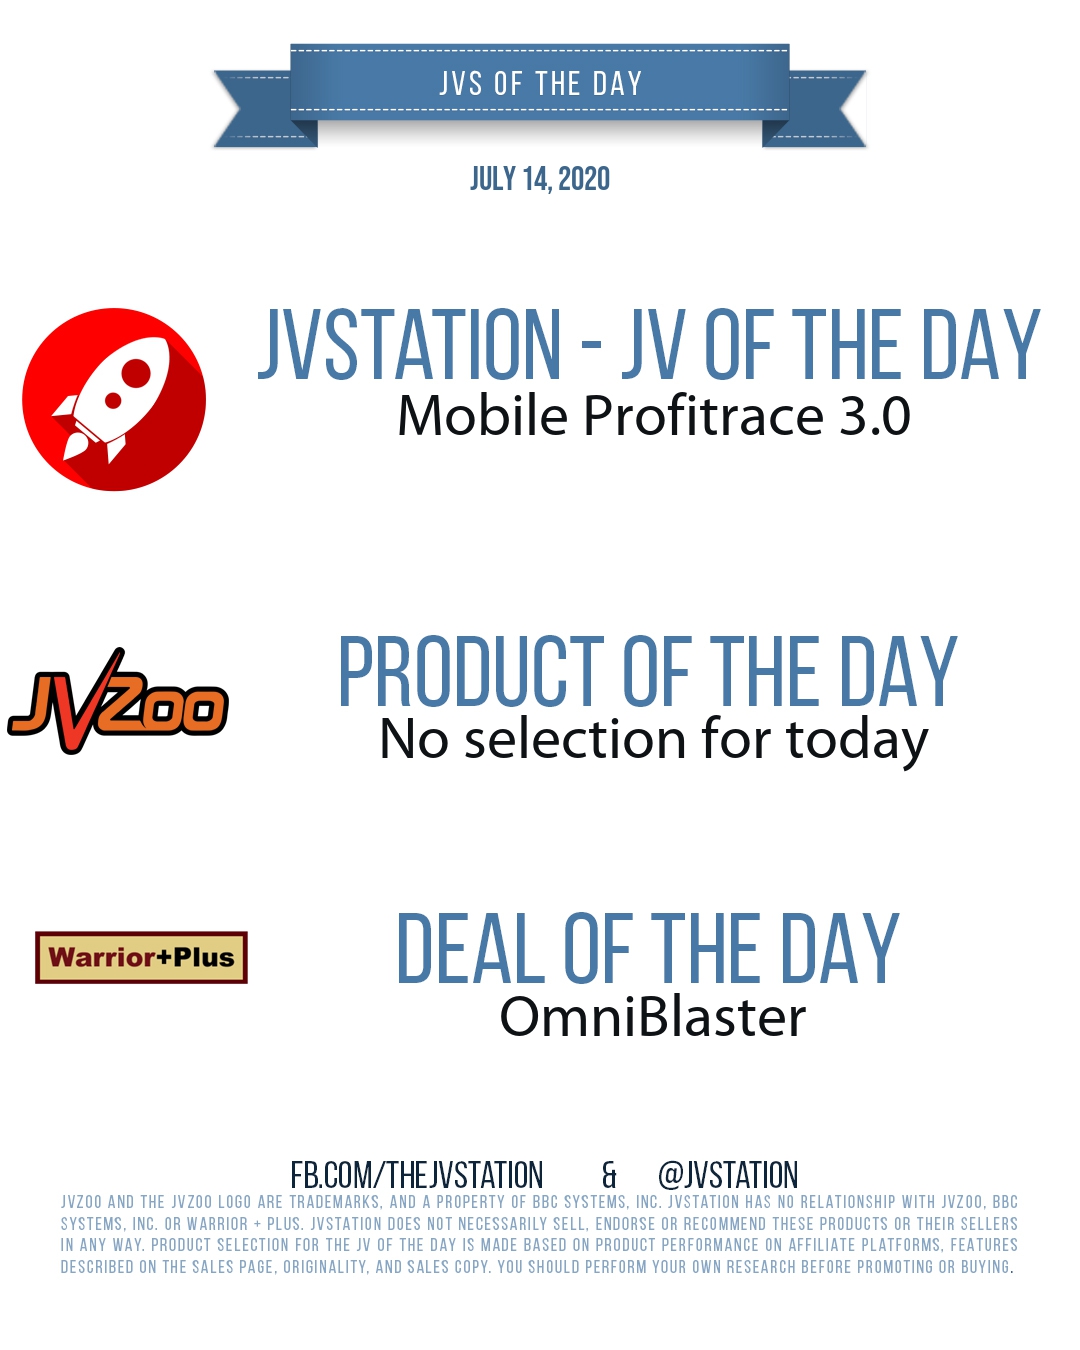 JVs of the day - July 14, 2020